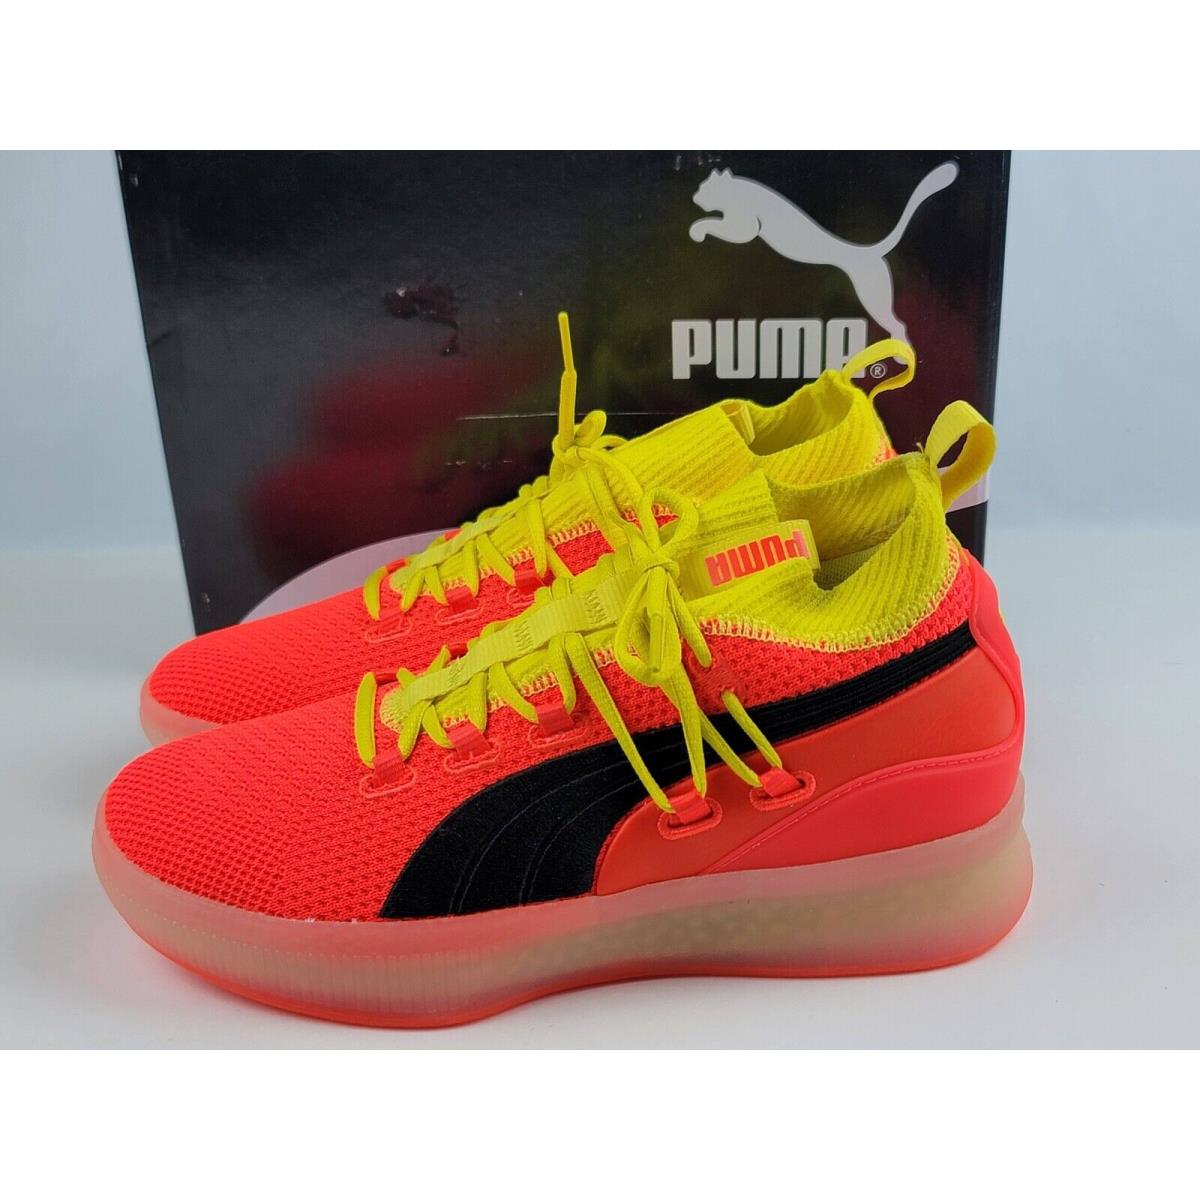 Puma Clyde Court Junior Size 7 Basketball Shoes Red Blast/yellow/ Sneakers